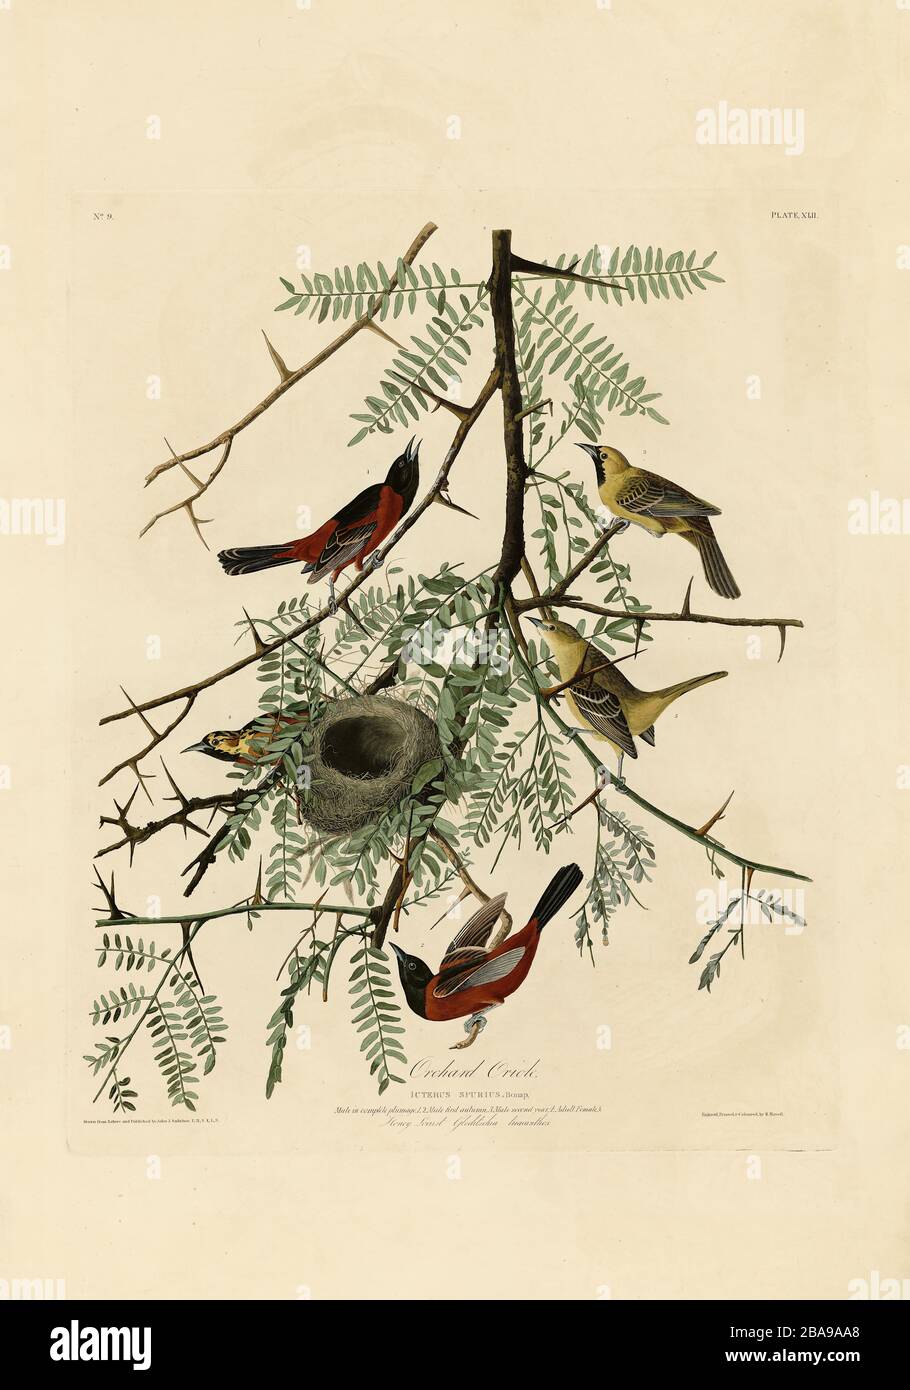 Plate 42 Orchard Oriole from The Birds of America folio (1827–1839) by John James Audubon - Very high resolution and quality edited image Stock Photo